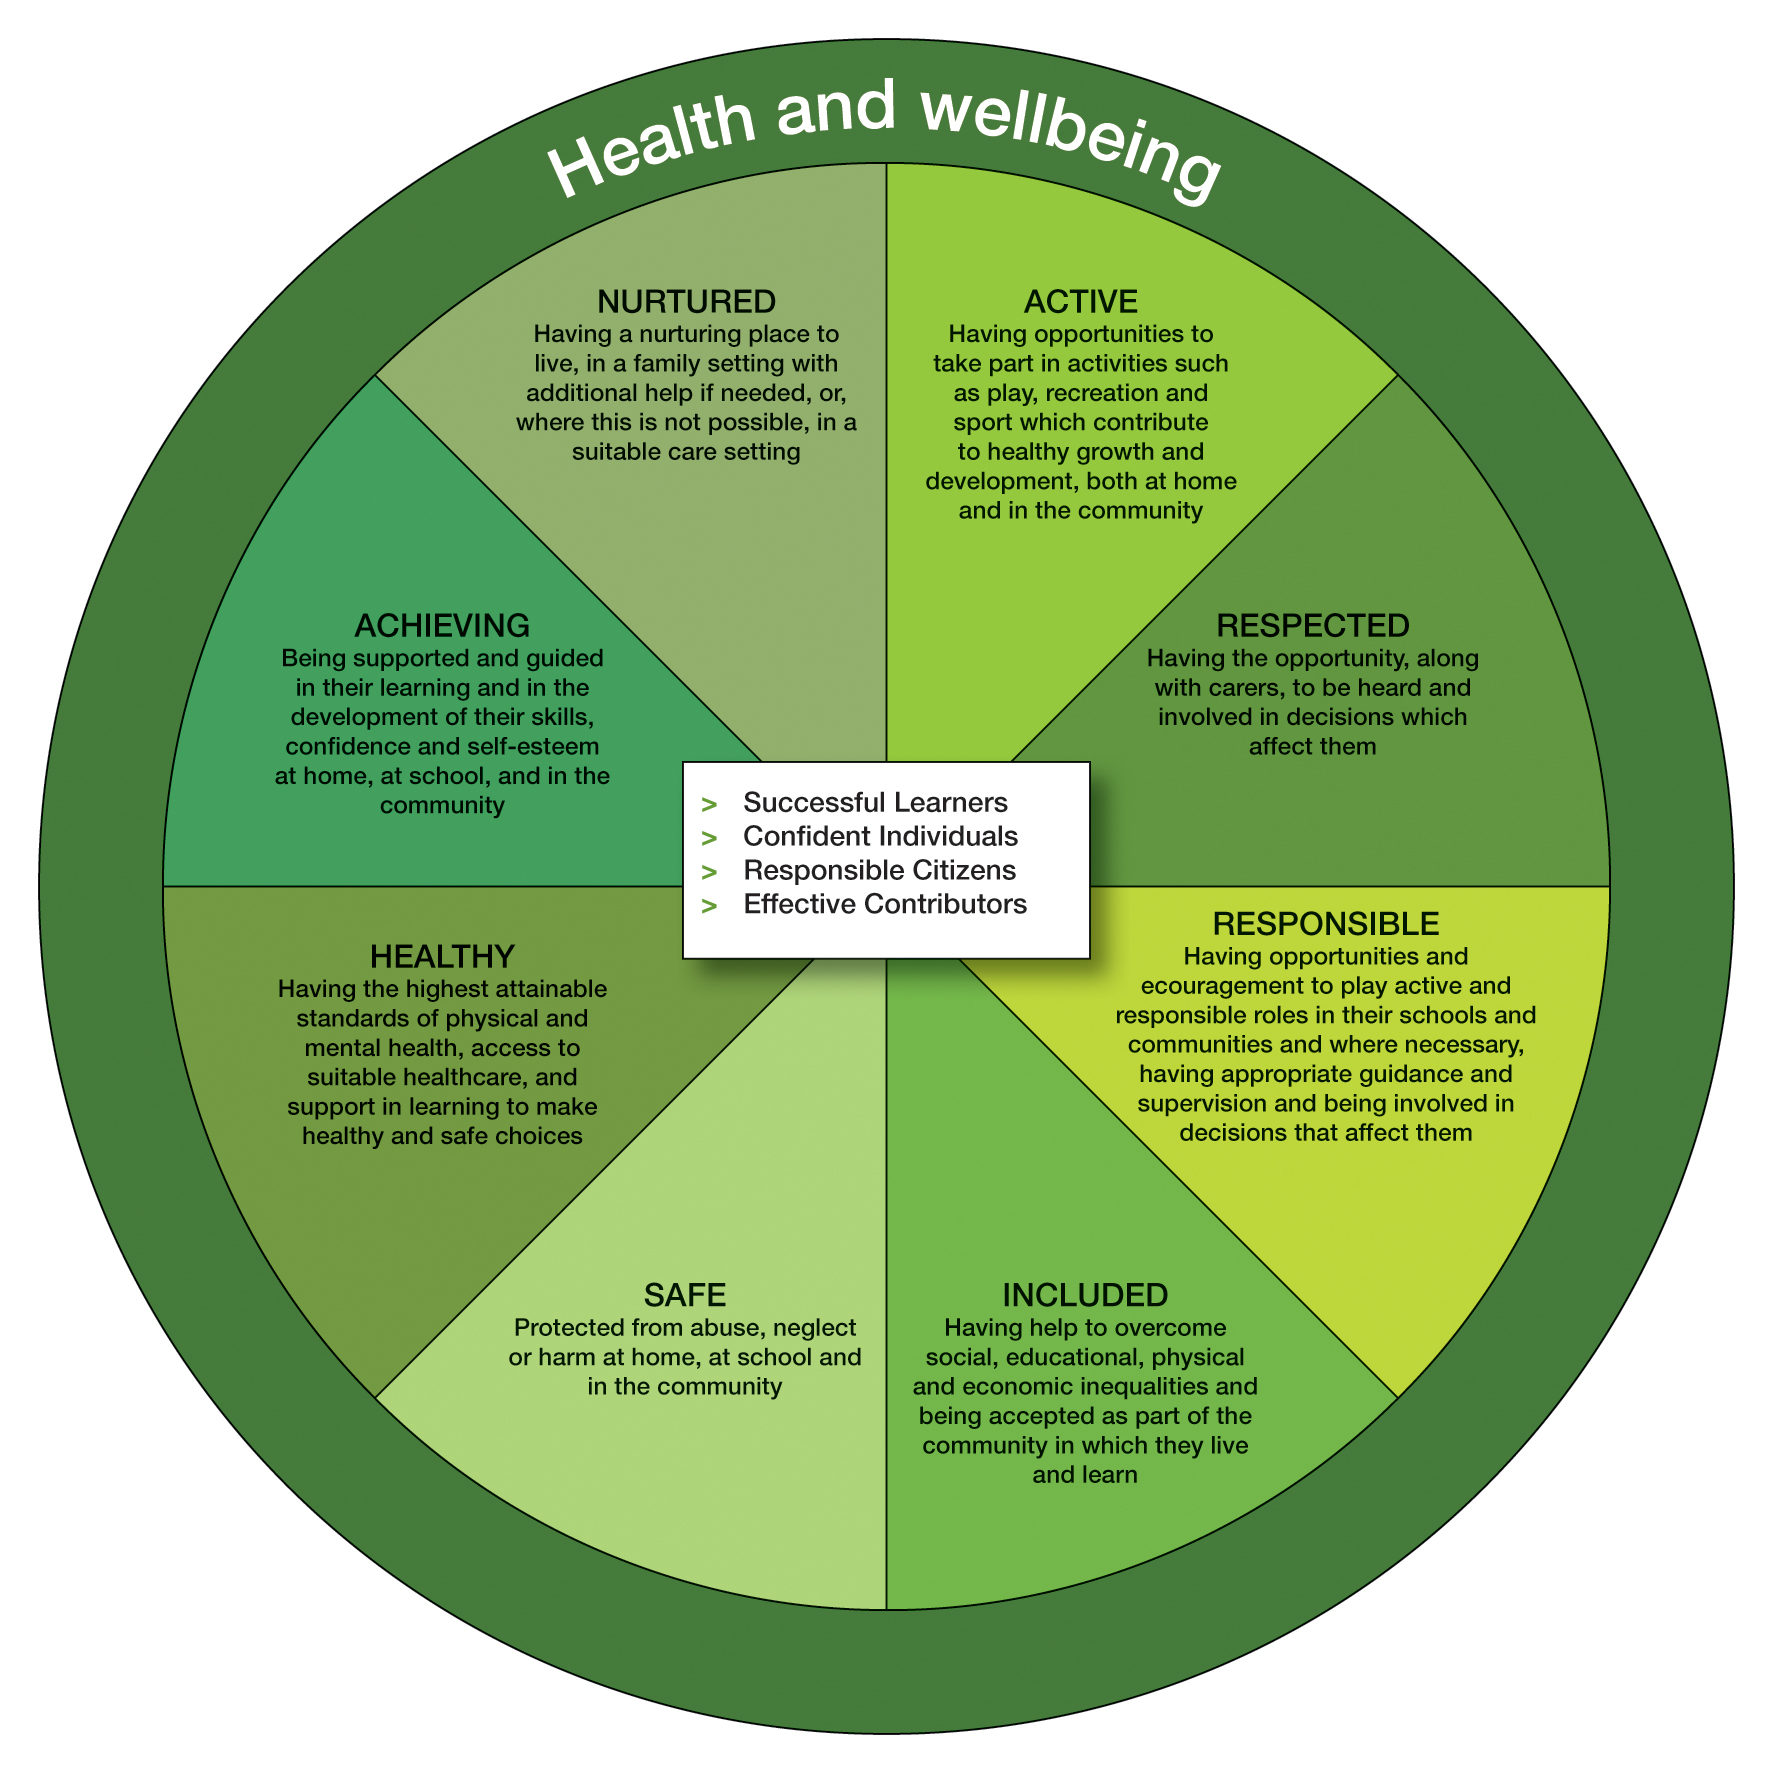 HEALTH AND WELLBEING ACROSS LEARNING RESPONSIBILITIES OF ALL PRINCIPLES